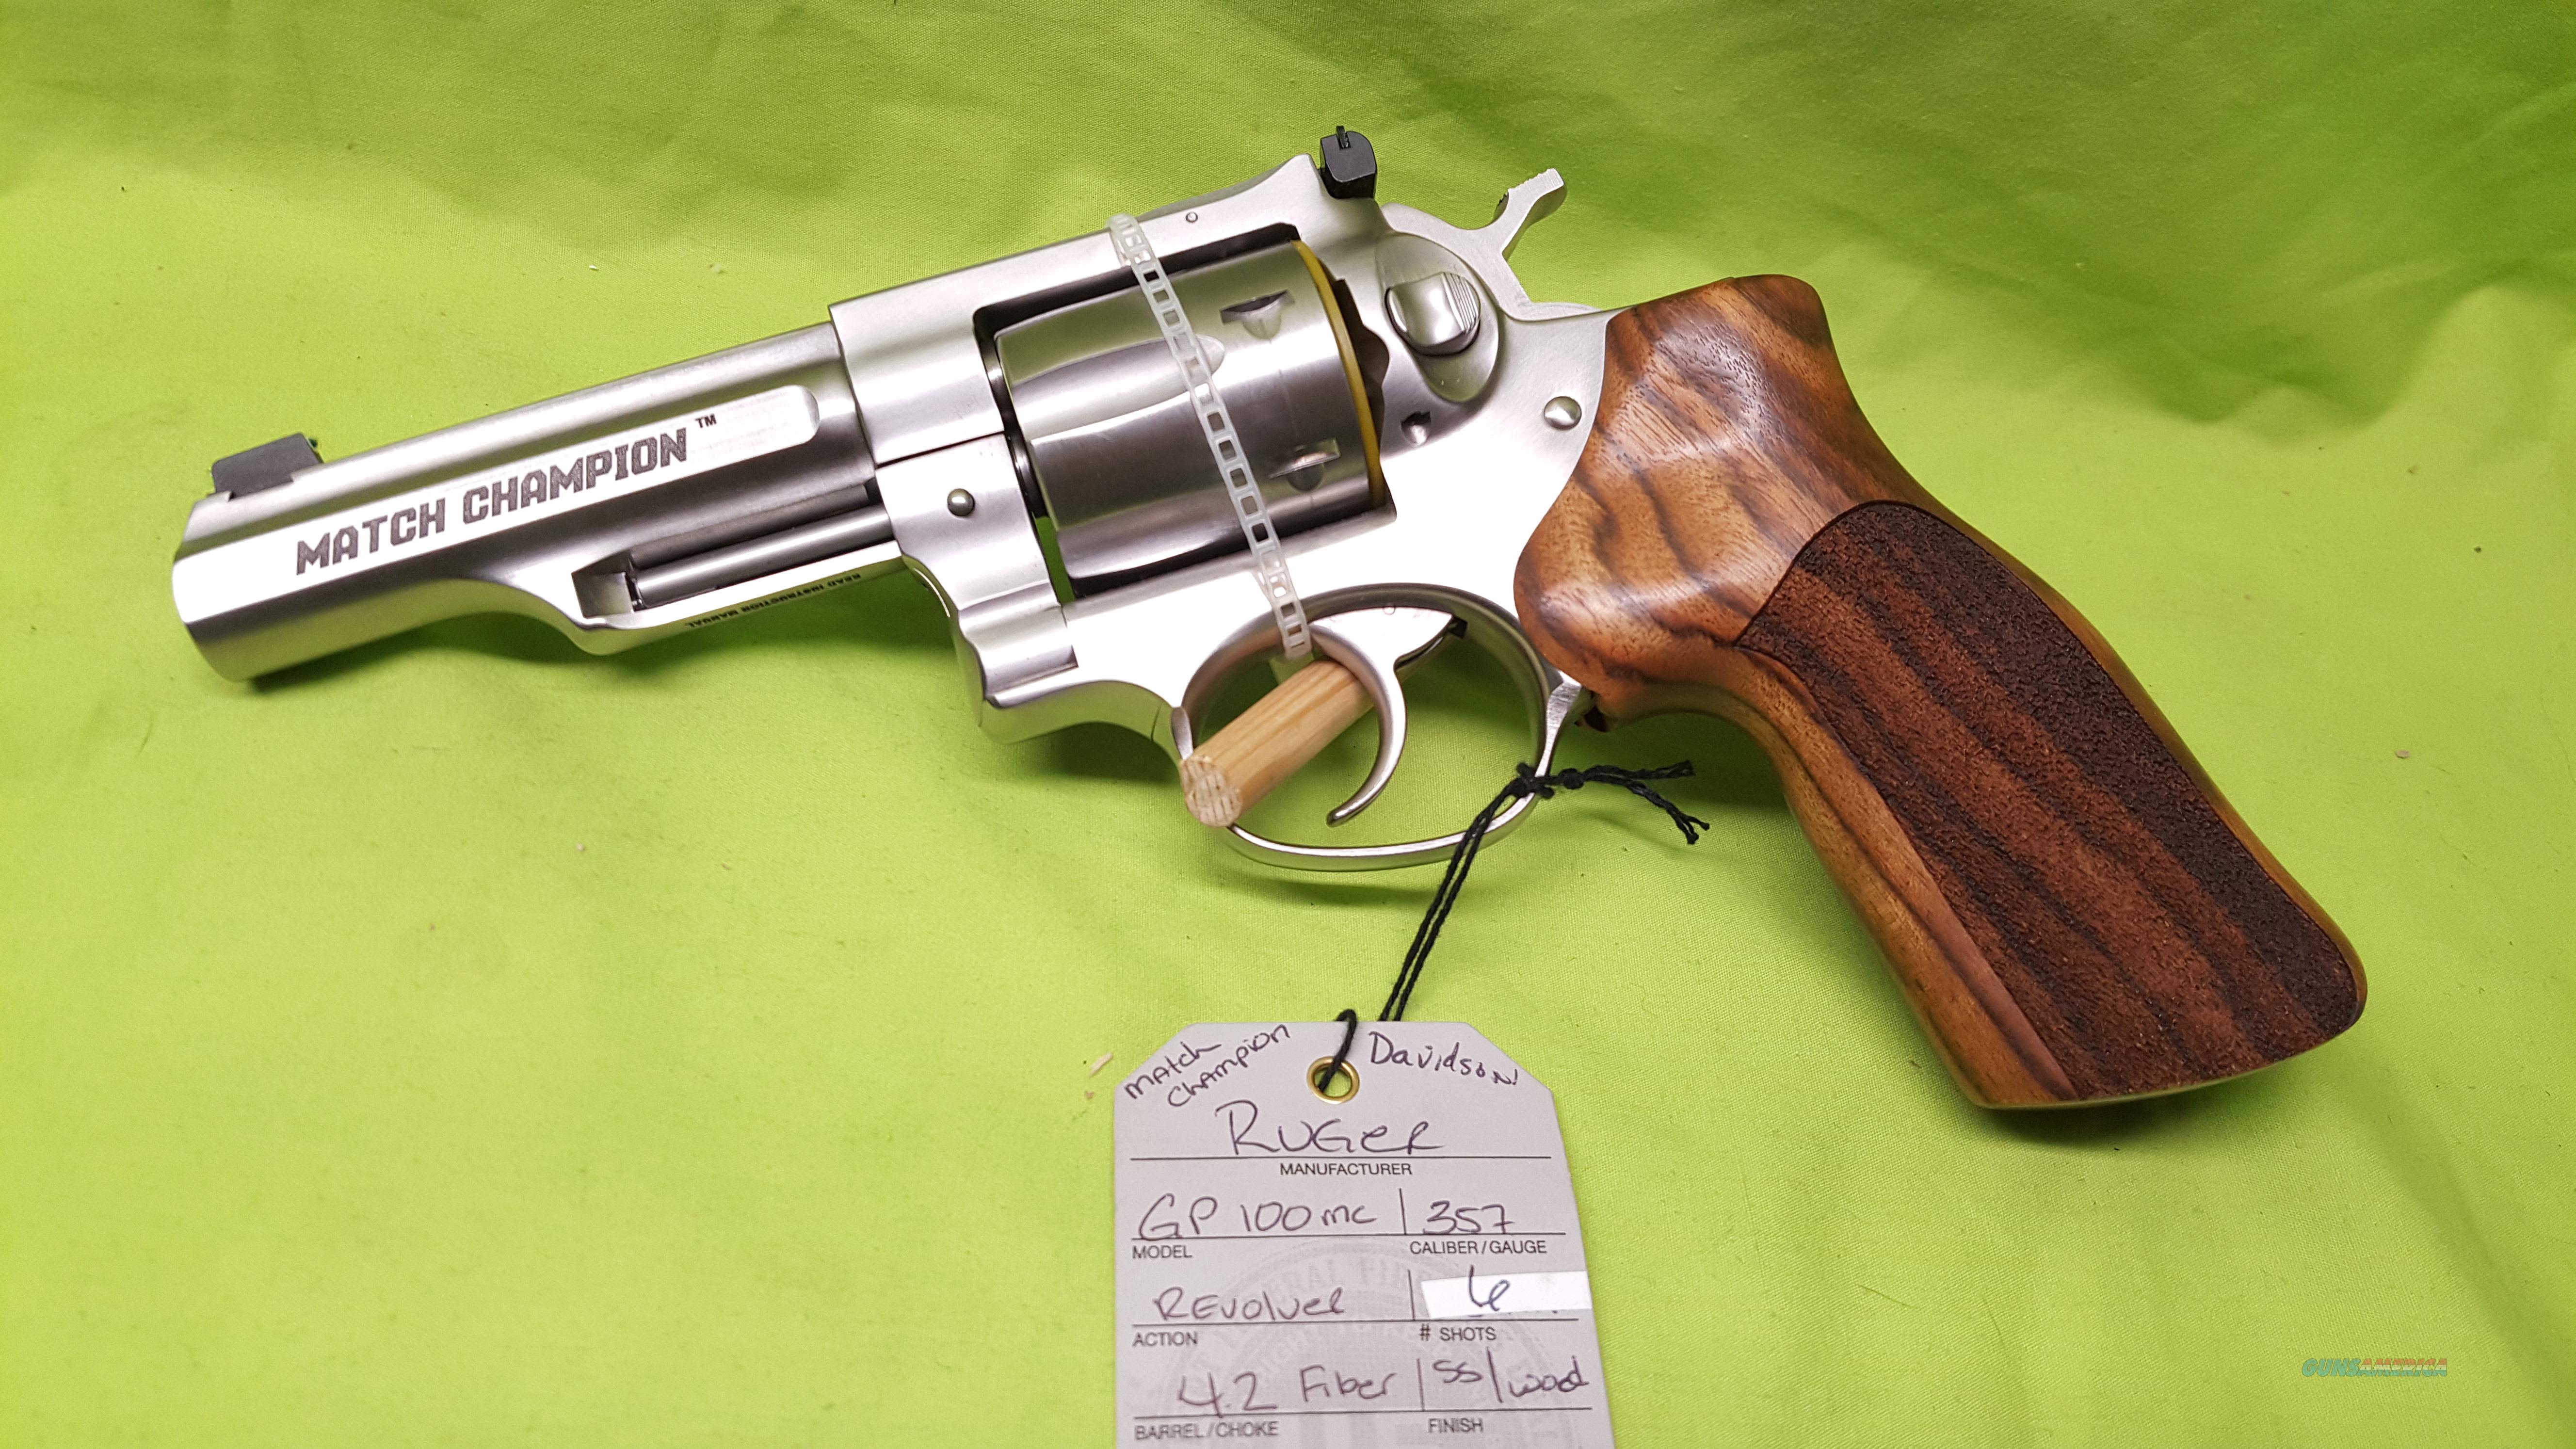 Ruger Gp100 Gp 100 Match Champion M For Sale At 939559582 6578